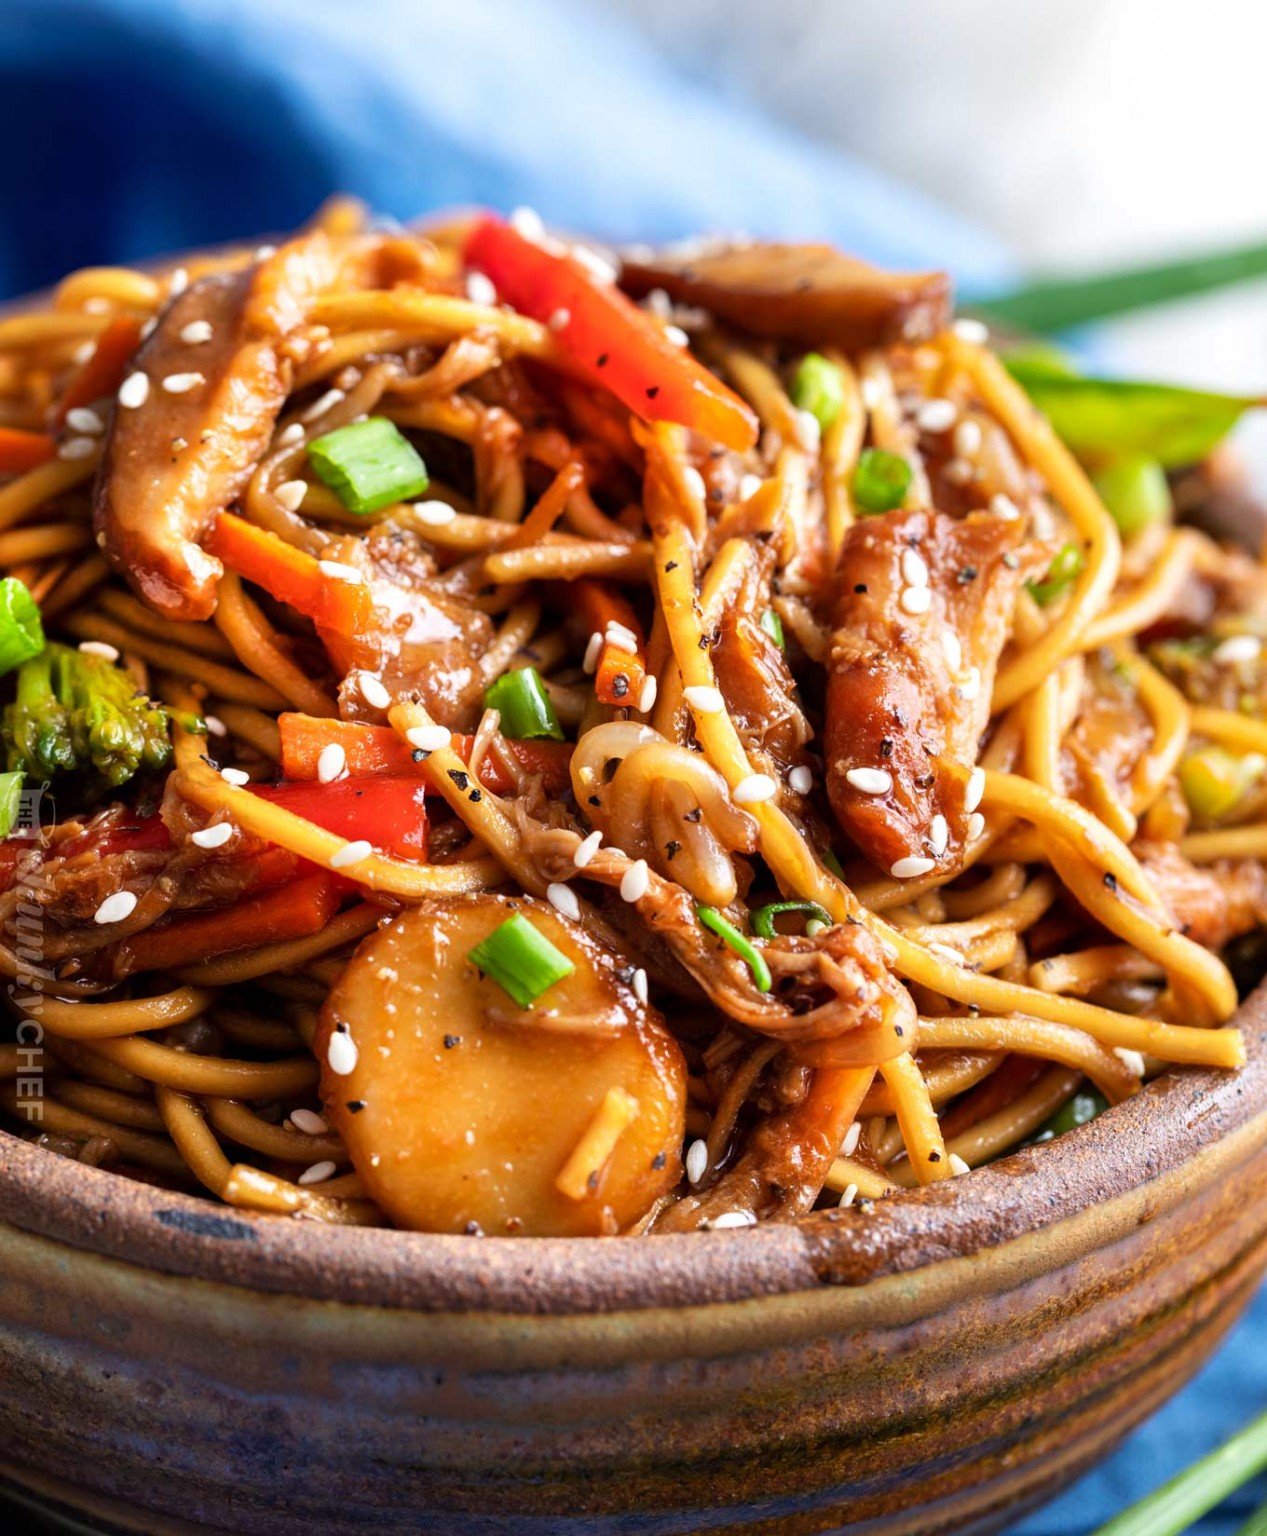 Easy Crockpot Chicken Lo Mein - The Chunky Chef